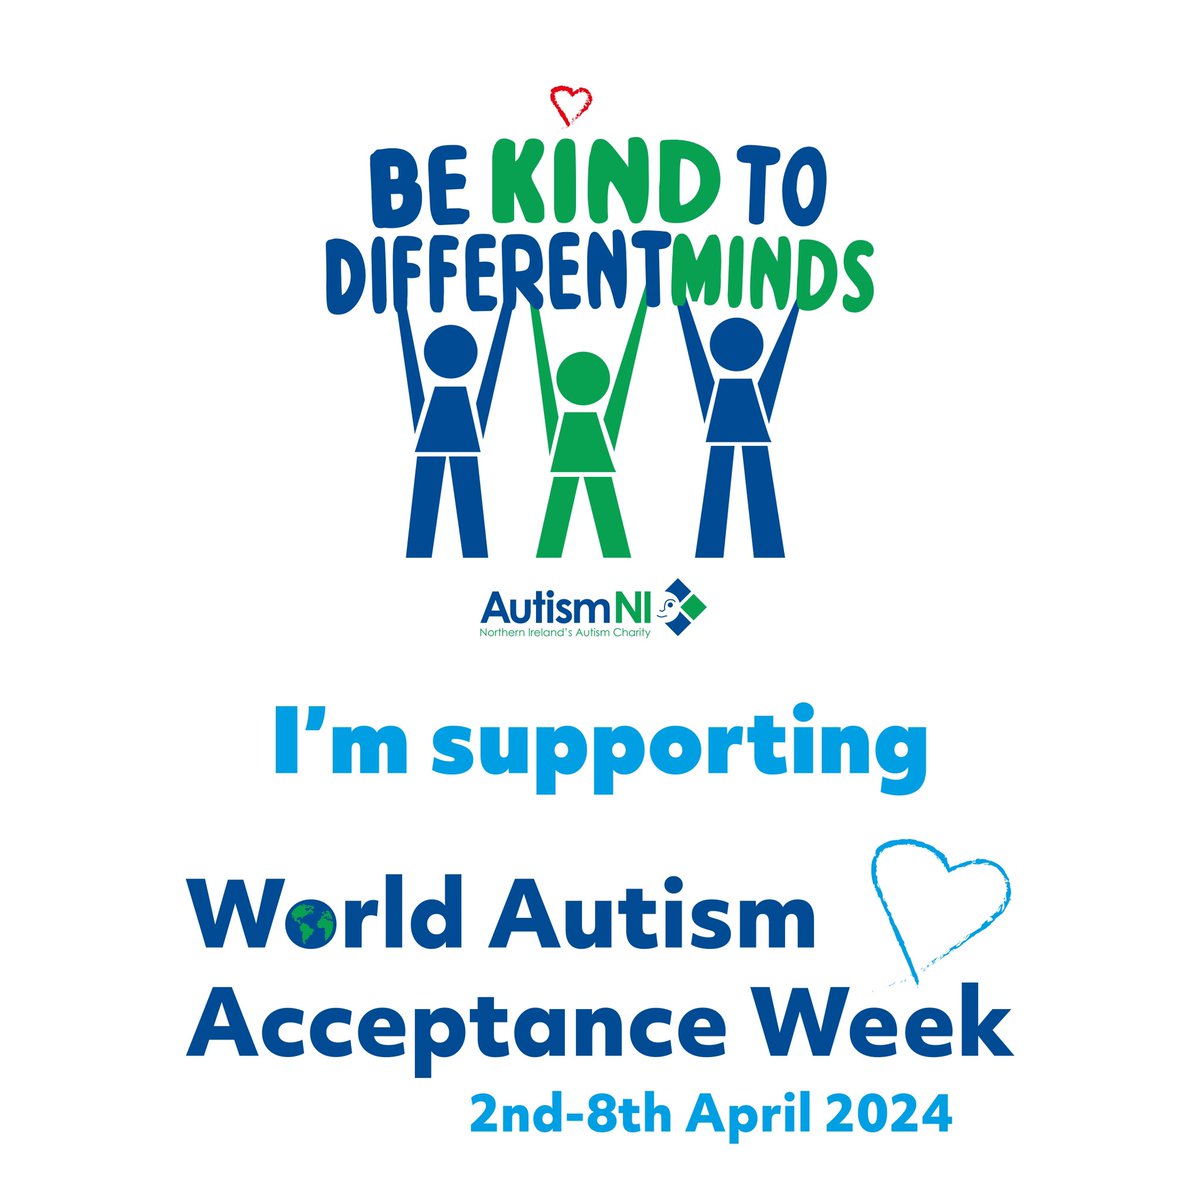 Heres to every person with autism, and their support crew, 

#WorldAutismAcceptanceWeek 

This week we celebrate the spectrum of colour and vitality #autism brings. 

#BeKindToDifferentMinds